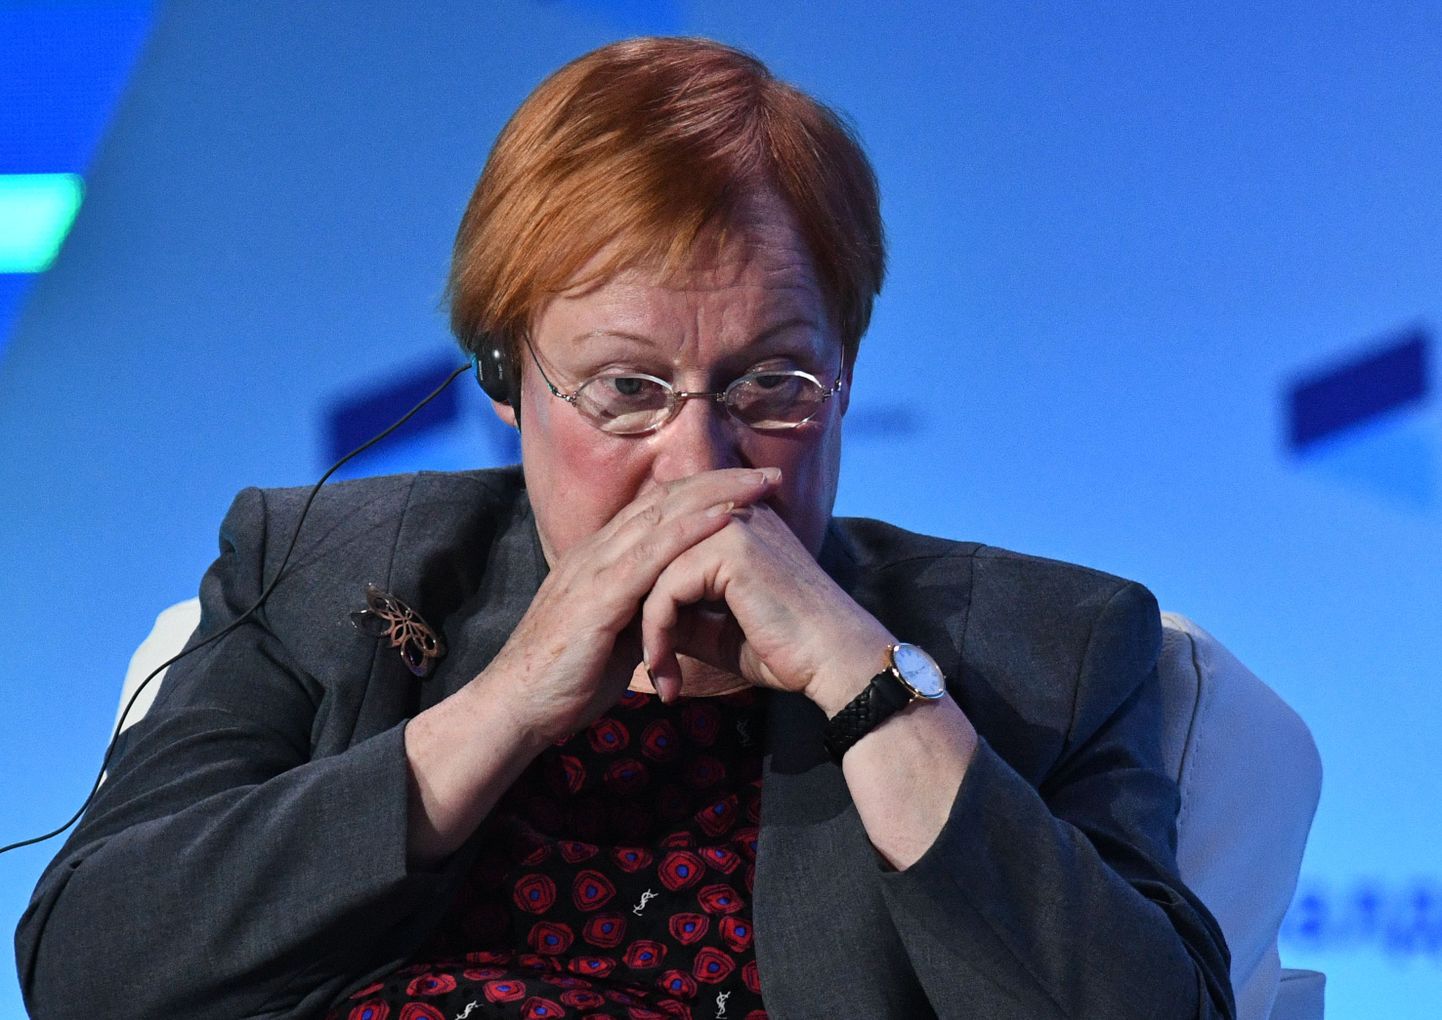 October 27, 2016. Finland's Foreign Minister and former president of the country Tarja Halonen attends the final plenary session at 13th Annual Meeting of the Valdai Discussion Club in Sochi.